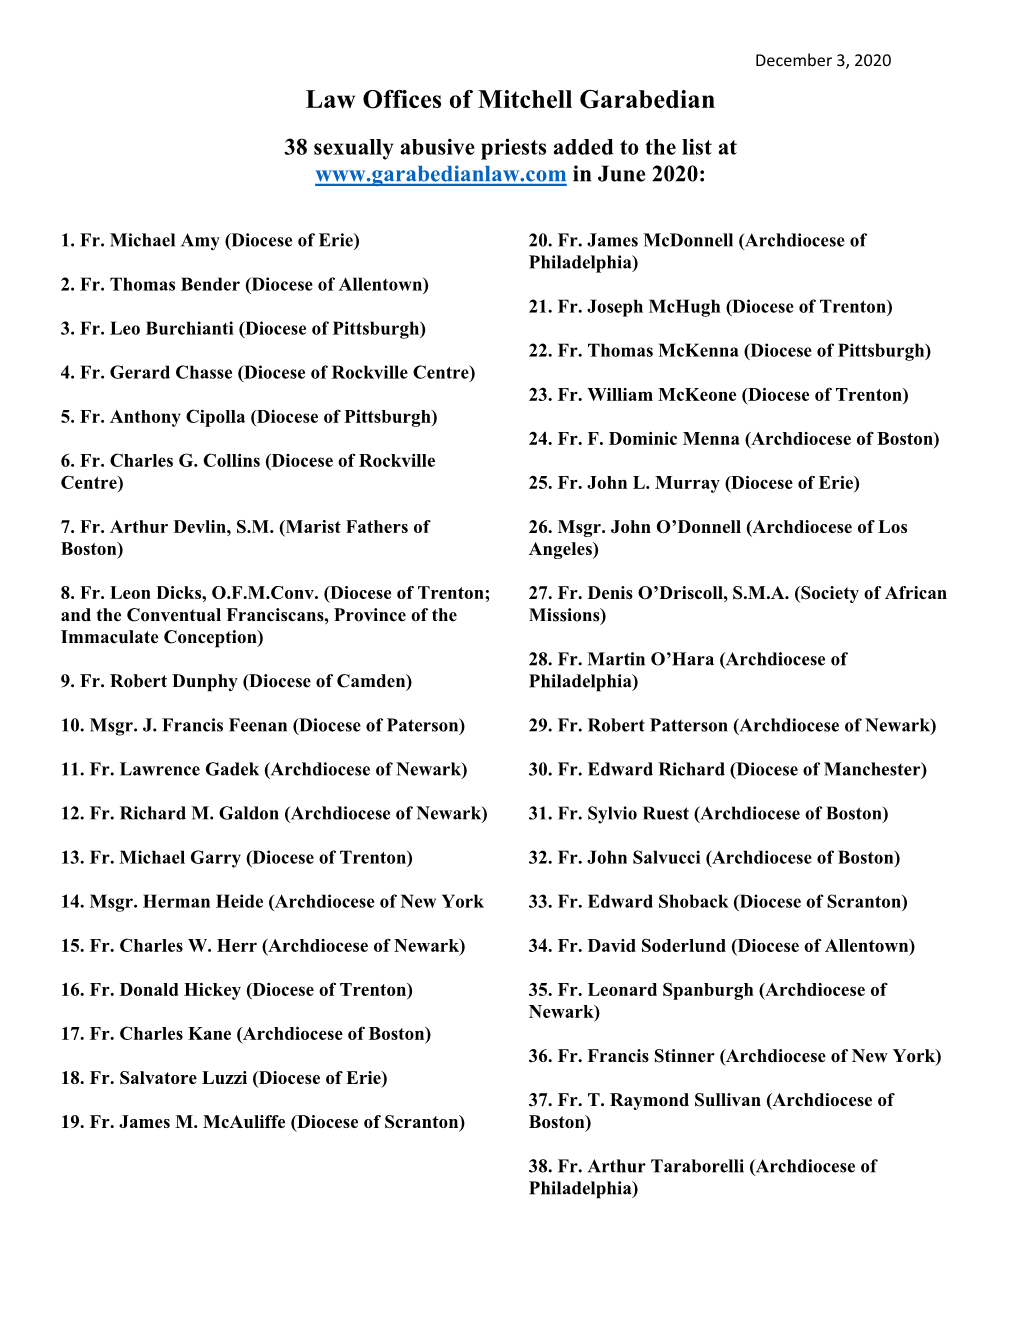 Law Offices of Mitchell Garabedian 38 Sexually Abusive Priests Added to the List at in June 2020